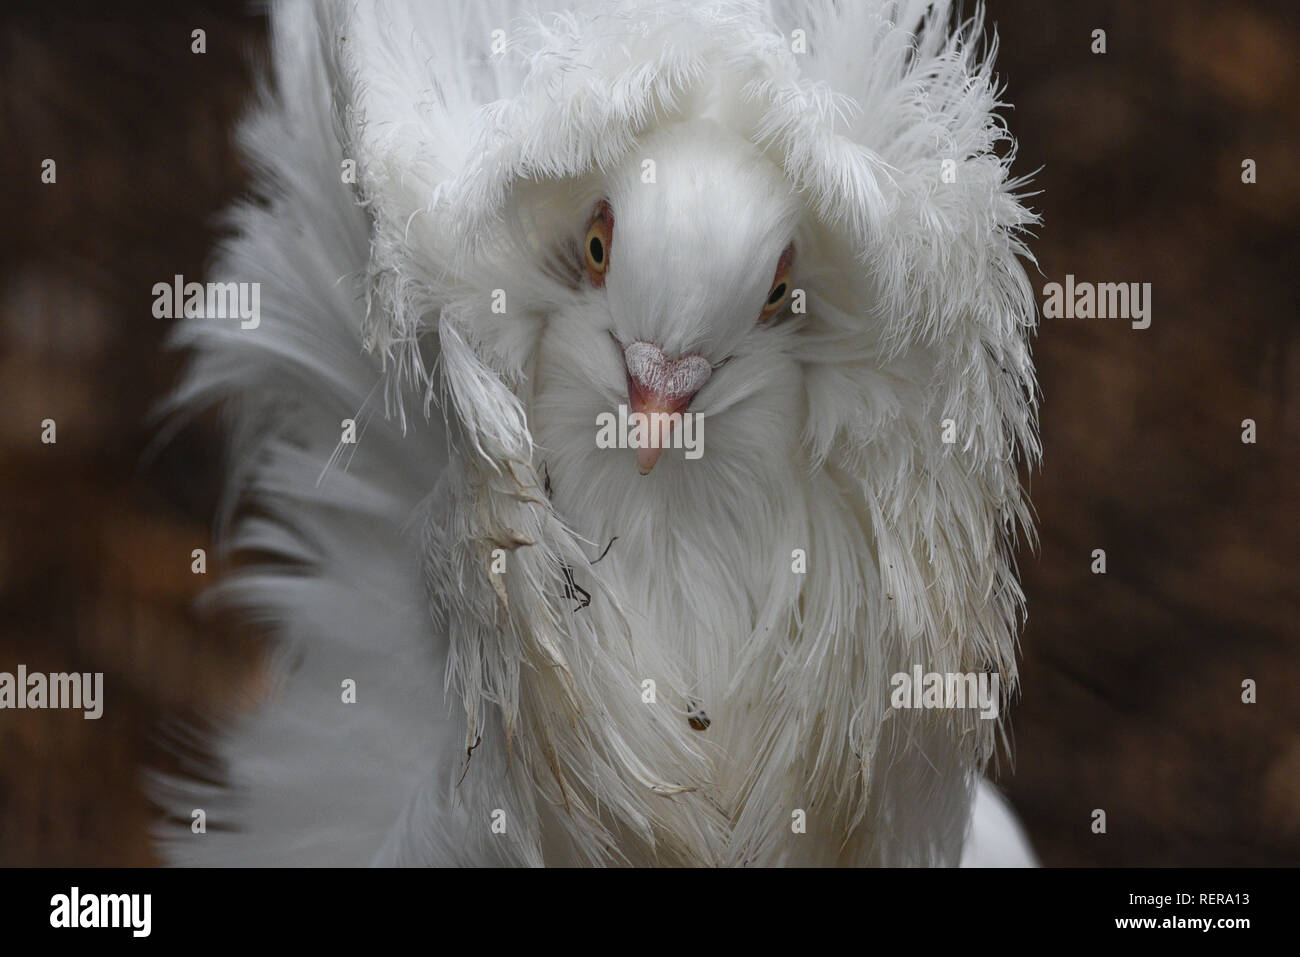 Madrid, Madrid, Spain. 22nd Jan, 2019. A jacobin pigeon is seen with its feathered hood agitated by wind at Madrid zoo, where the gusts of wind reached 30 kilometers an hour during the afternoon hours. According to the AEMET state meteorology service, has issued yellow and orange alerts for wind, rain, snow and strong waves in several provinces during the next days. Credit: John Milner/SOPA Images/ZUMA Wire/Alamy Live News Stock Photo